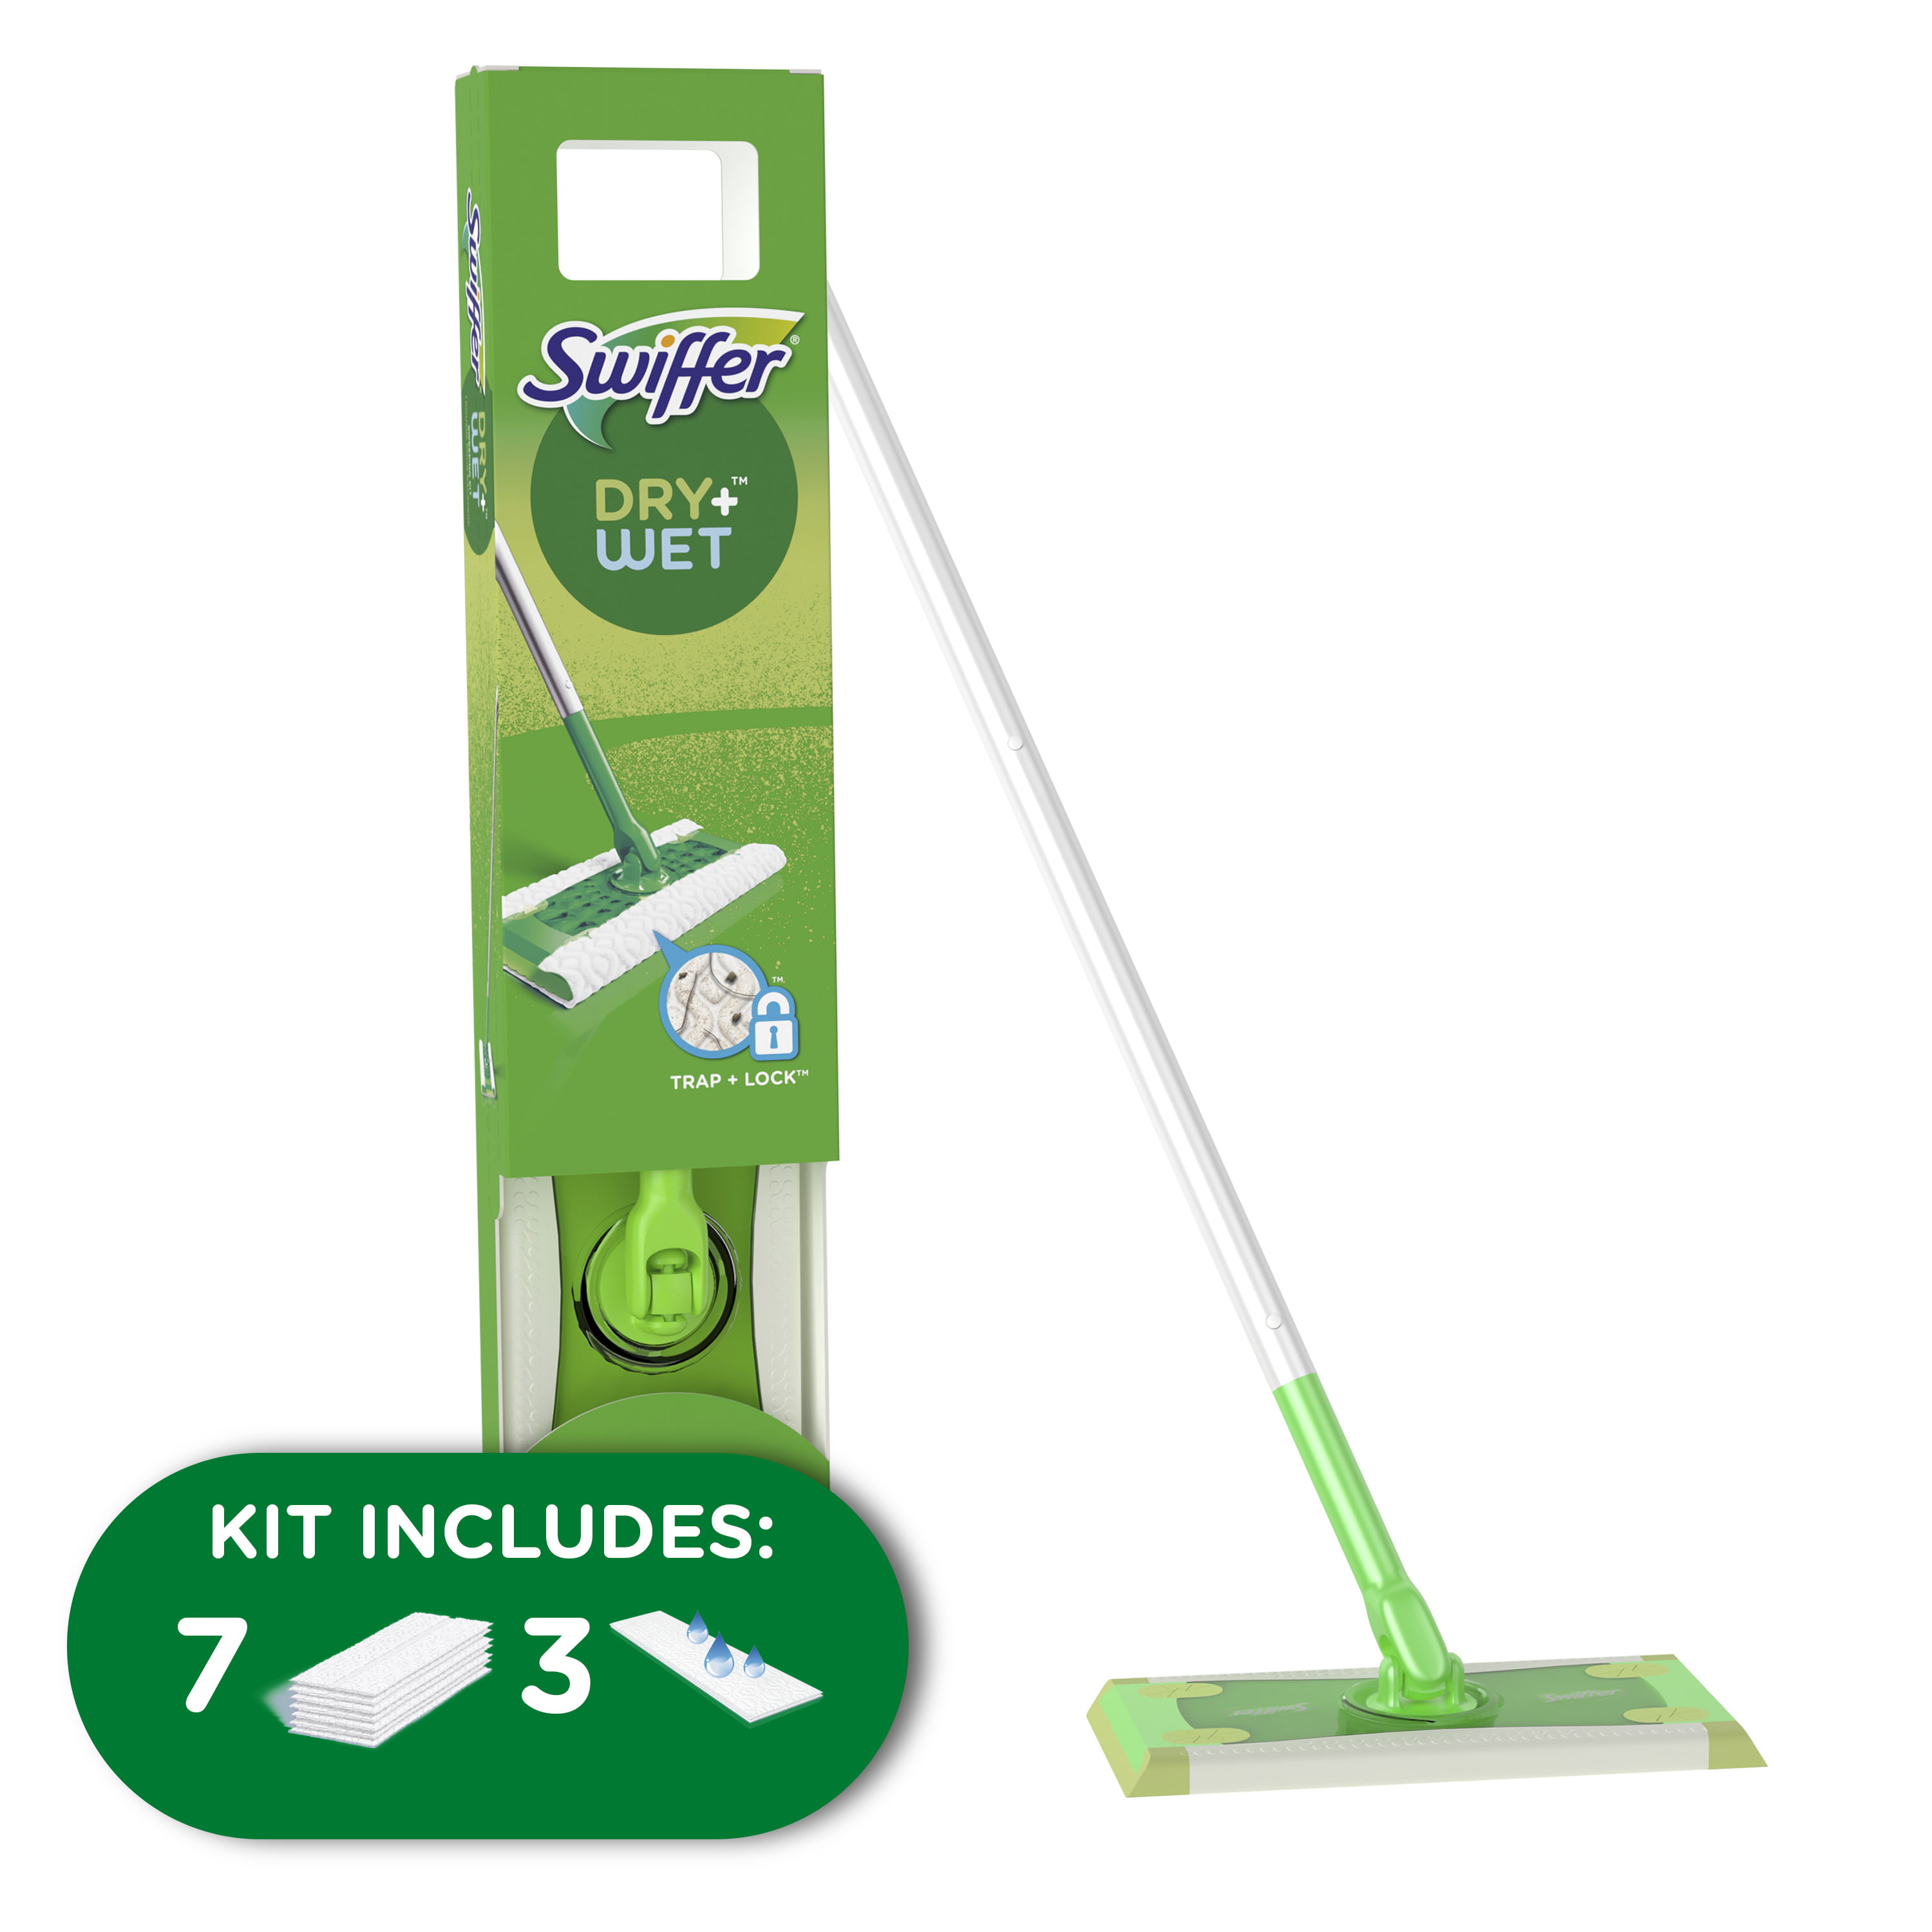 Swiffer Sweeper 2-in-1, Dry and Wet Multi Surface Floor Cleaner, Sweeping  and Mopping Starter Kit. Includes 1 Mop + 10 Refills - Walmart.com